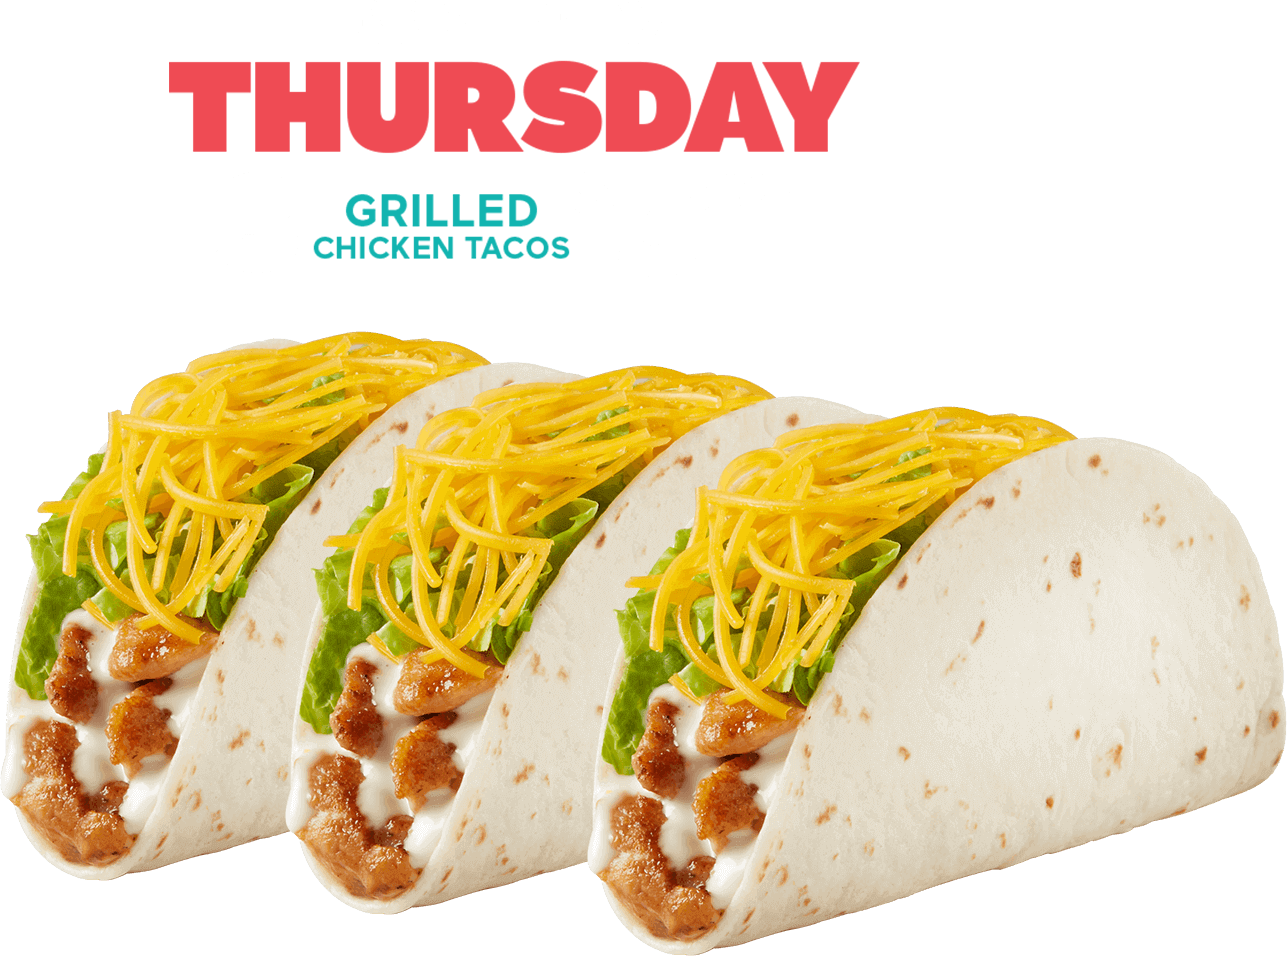 Every Thursday 3 Grilled Chicken Tacos $2.69 (mobile heading)